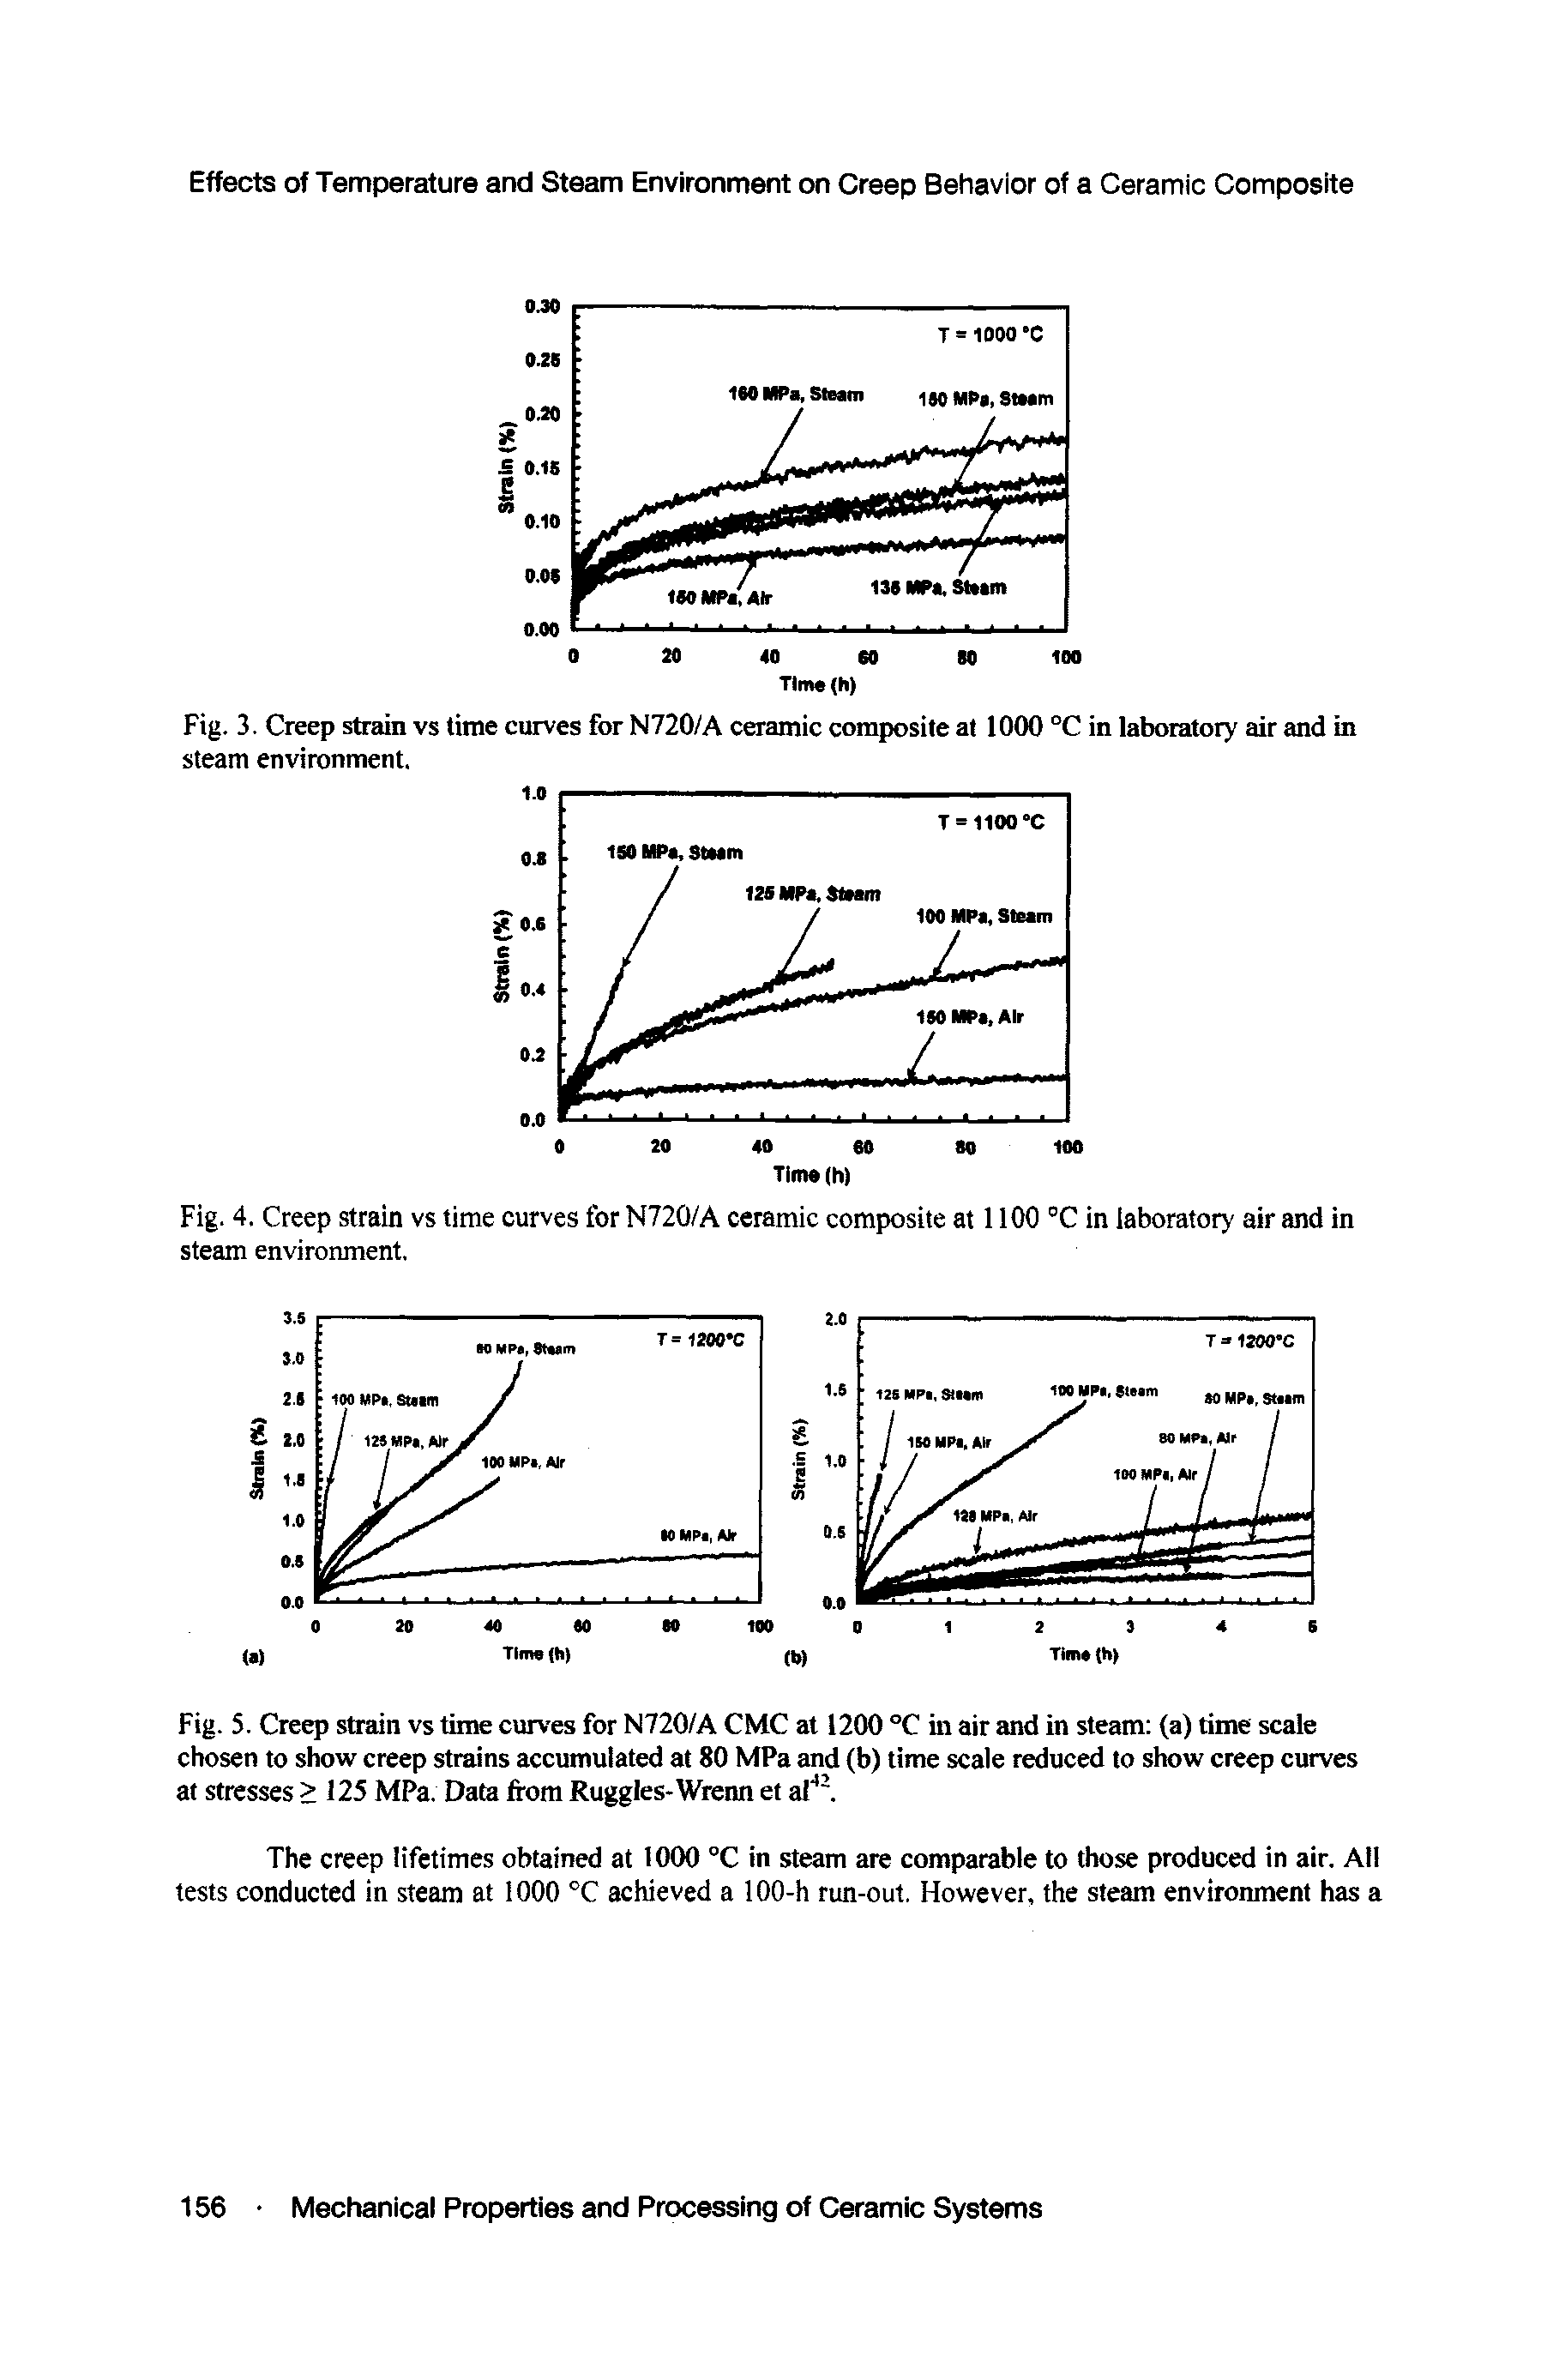 Fig. 3. Creep strain vs time curves for N720/A ceramic composite at 1000 °C in laboratory air and in steam environment.